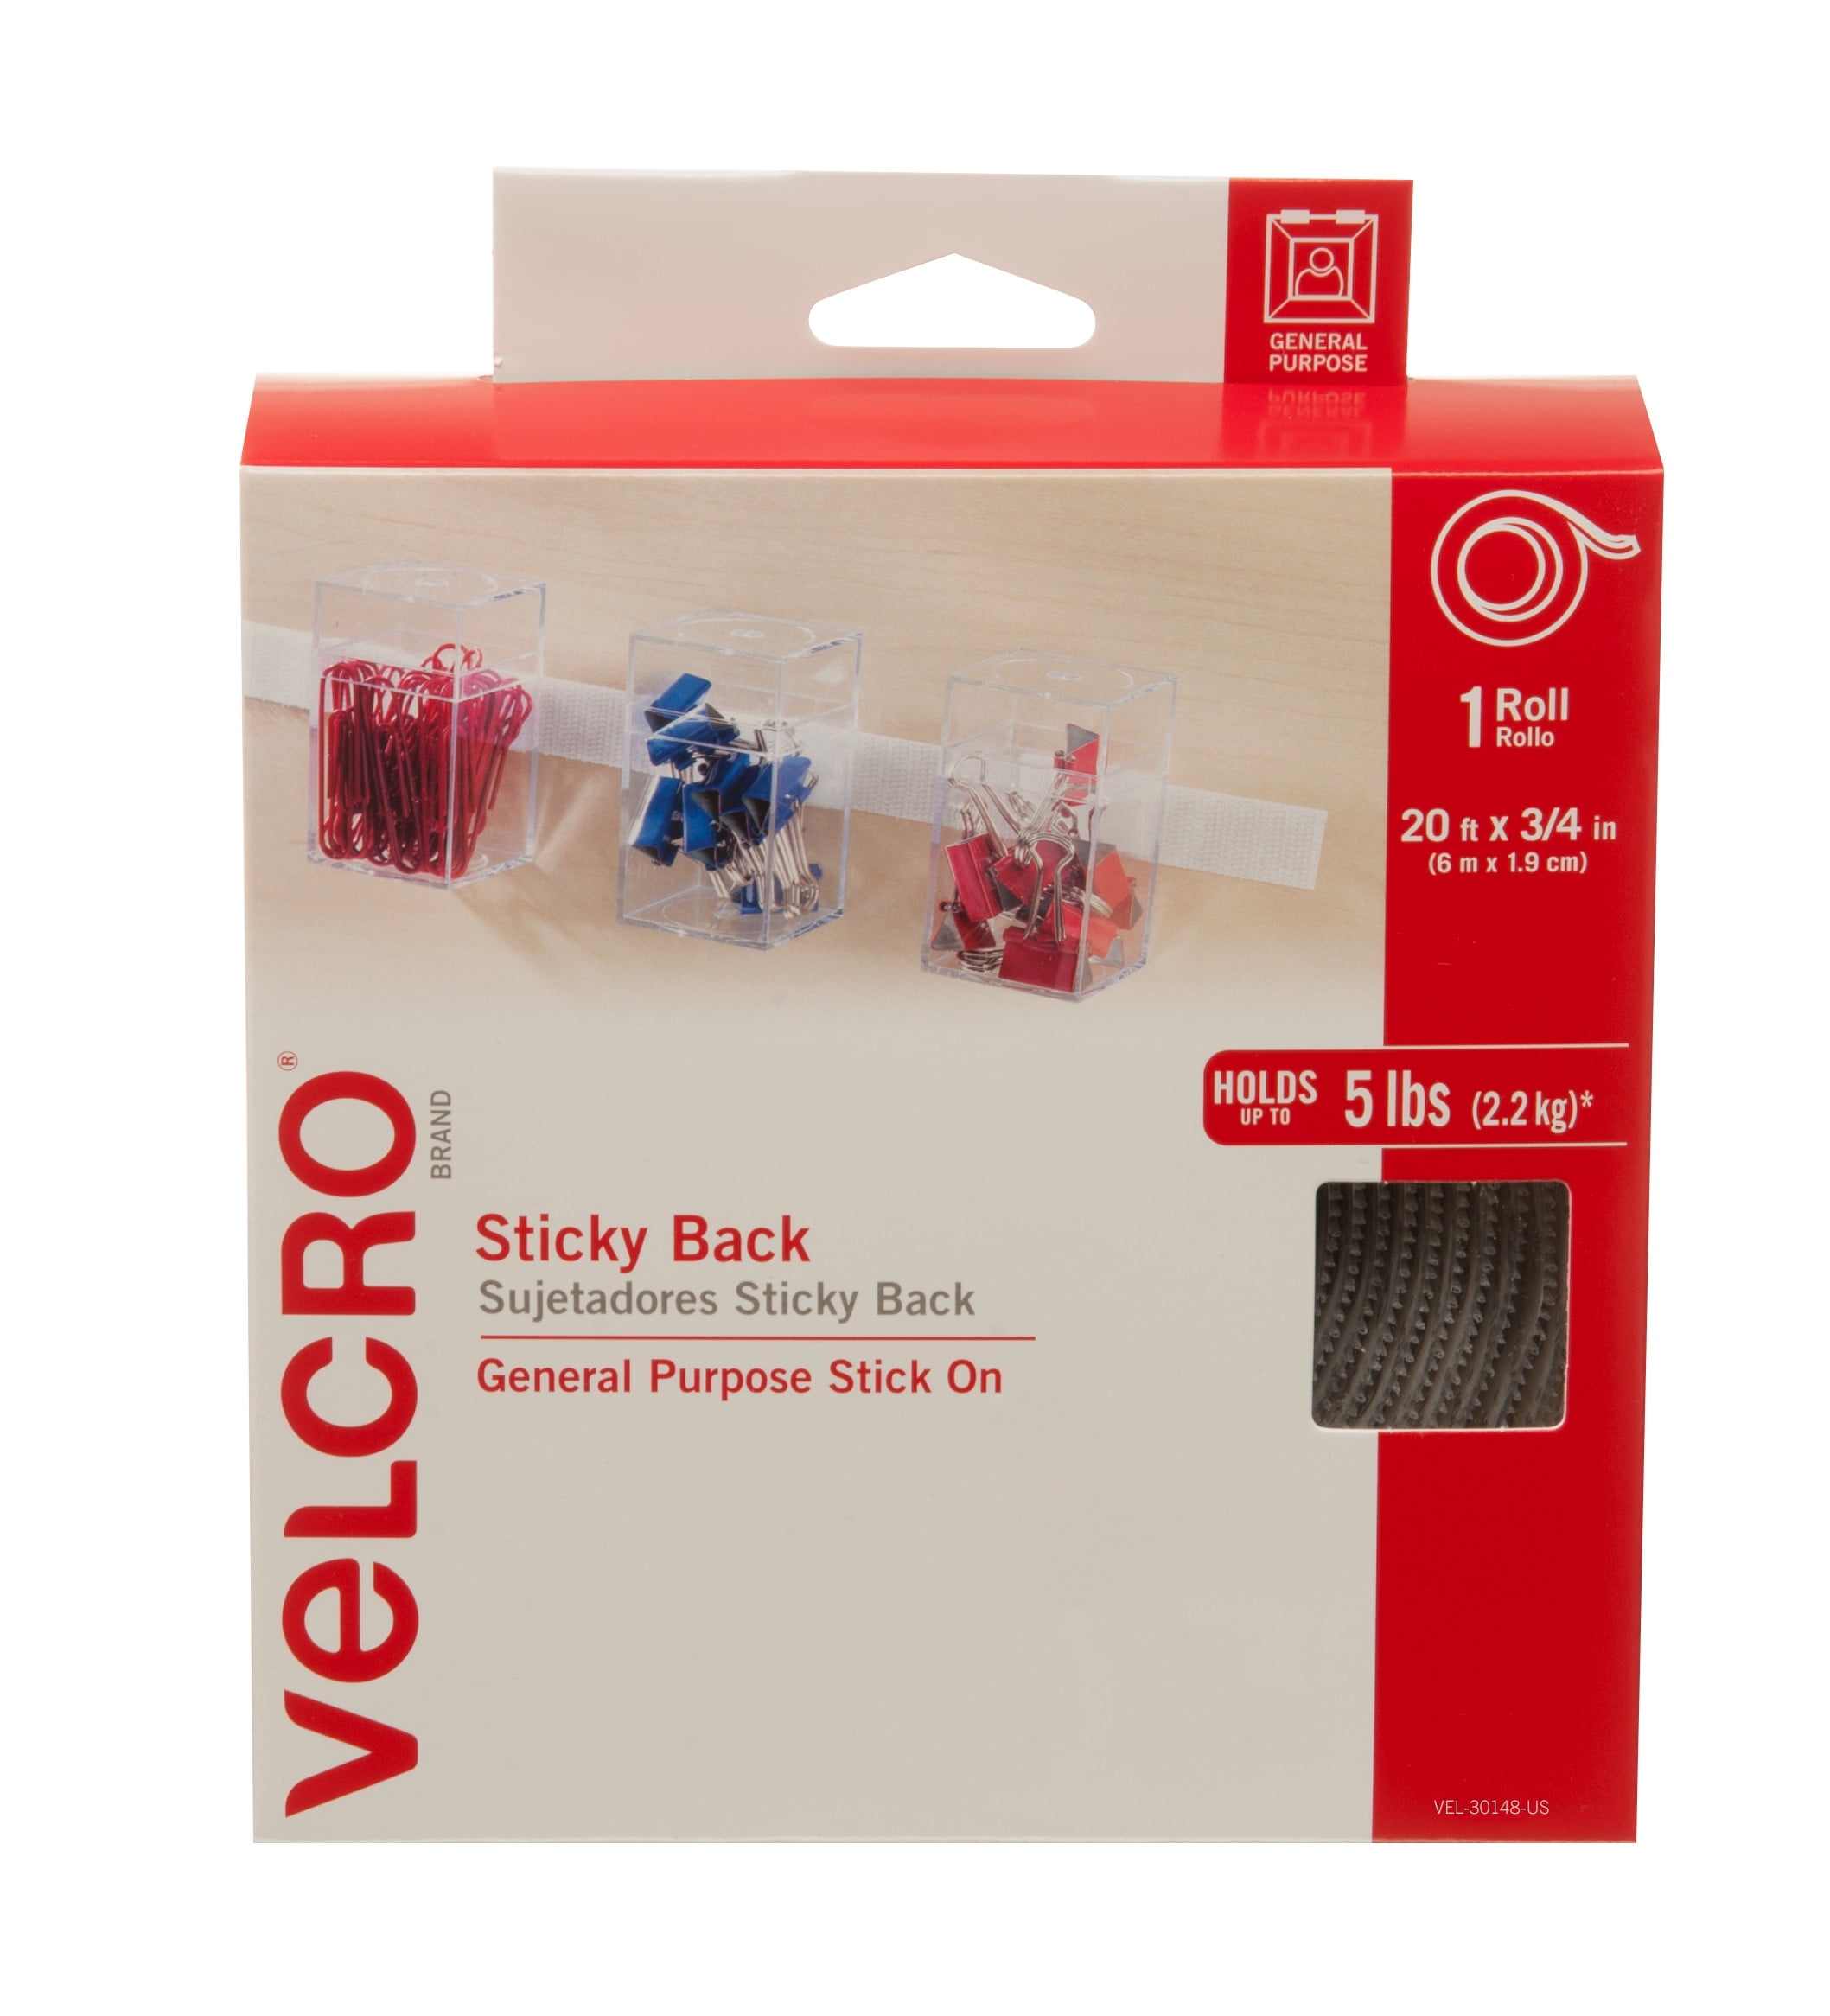 VELCRO Brand Heavy Duty Fasteners | 4x2 Strips with Adhesive 8 Sets |  Holds 10 lbs & Mounting Squares | Pack of 20 | 7/8 White | Adhesive Sticky